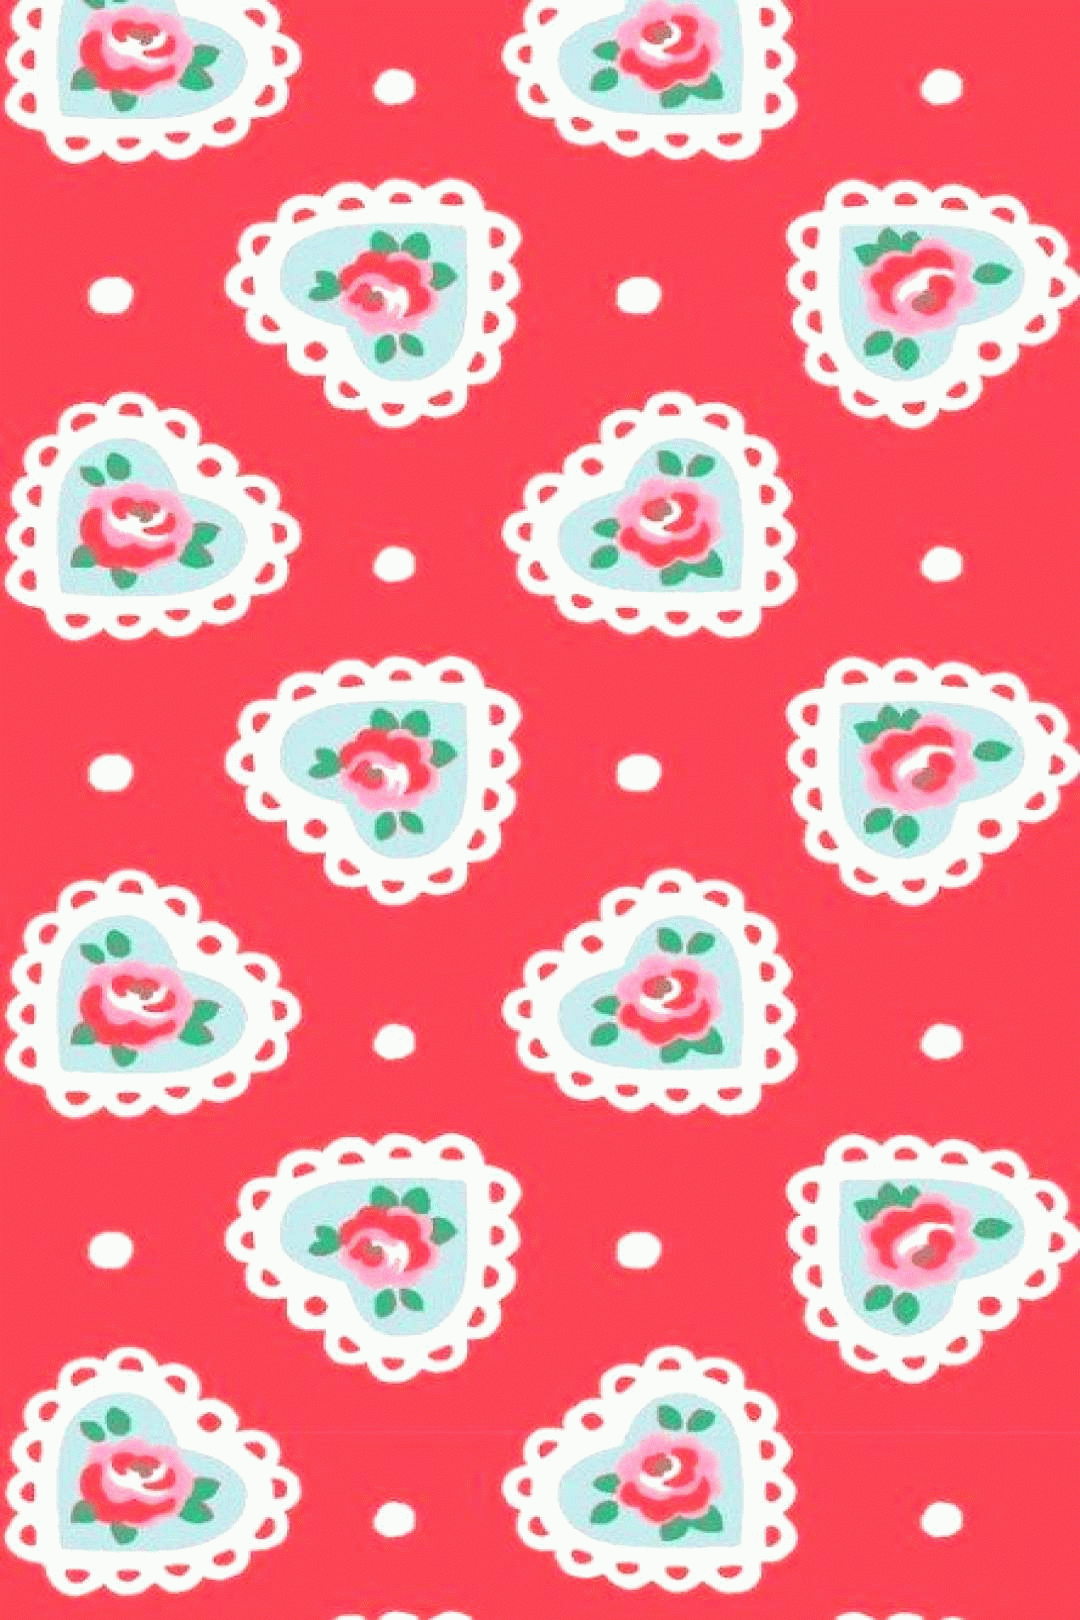 wall paper iphone vintage flowers cath kidston 15 ideas small